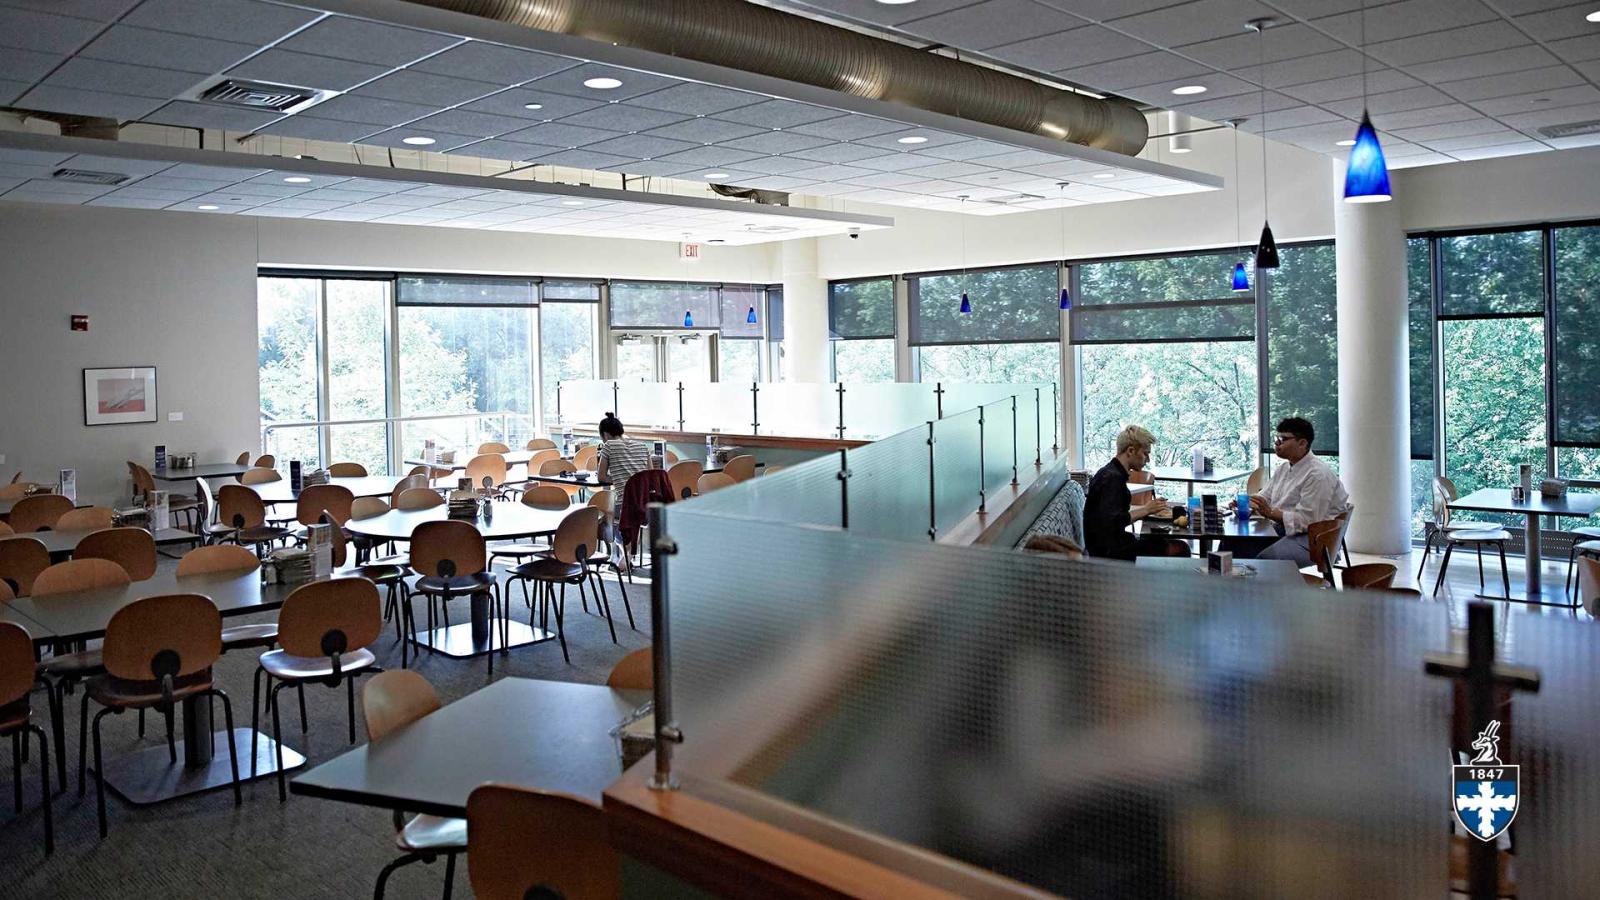 Spacious dining room with students eating in background.